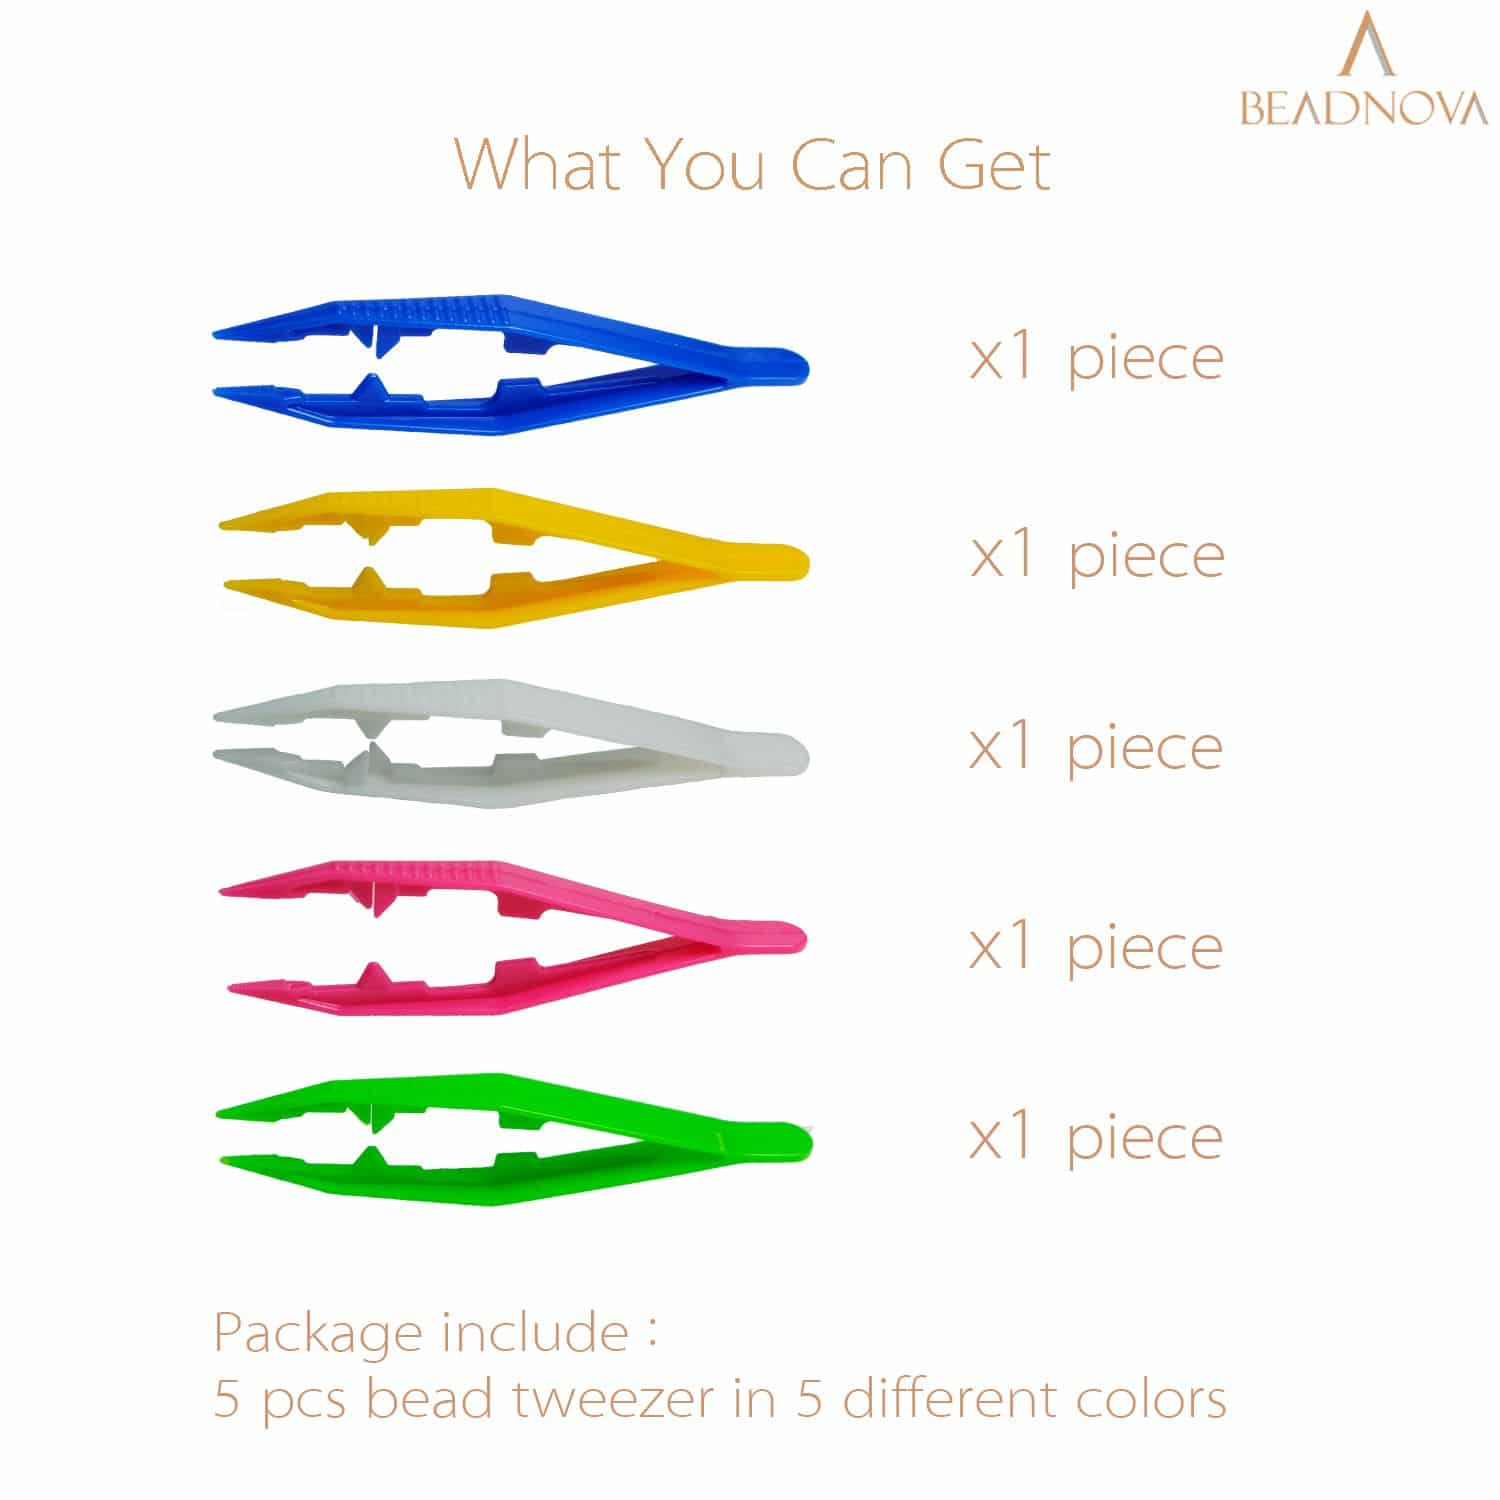 Incraftables Assorted Kids Tweezers 20pcs. Best Tweezers for Kids Including Plastic  Tweezers for Kids & Fun Craft Animal Shape Tweezers. Kids Tongs for DIY  Projects, Pearl Beads, Jewelry Making & More